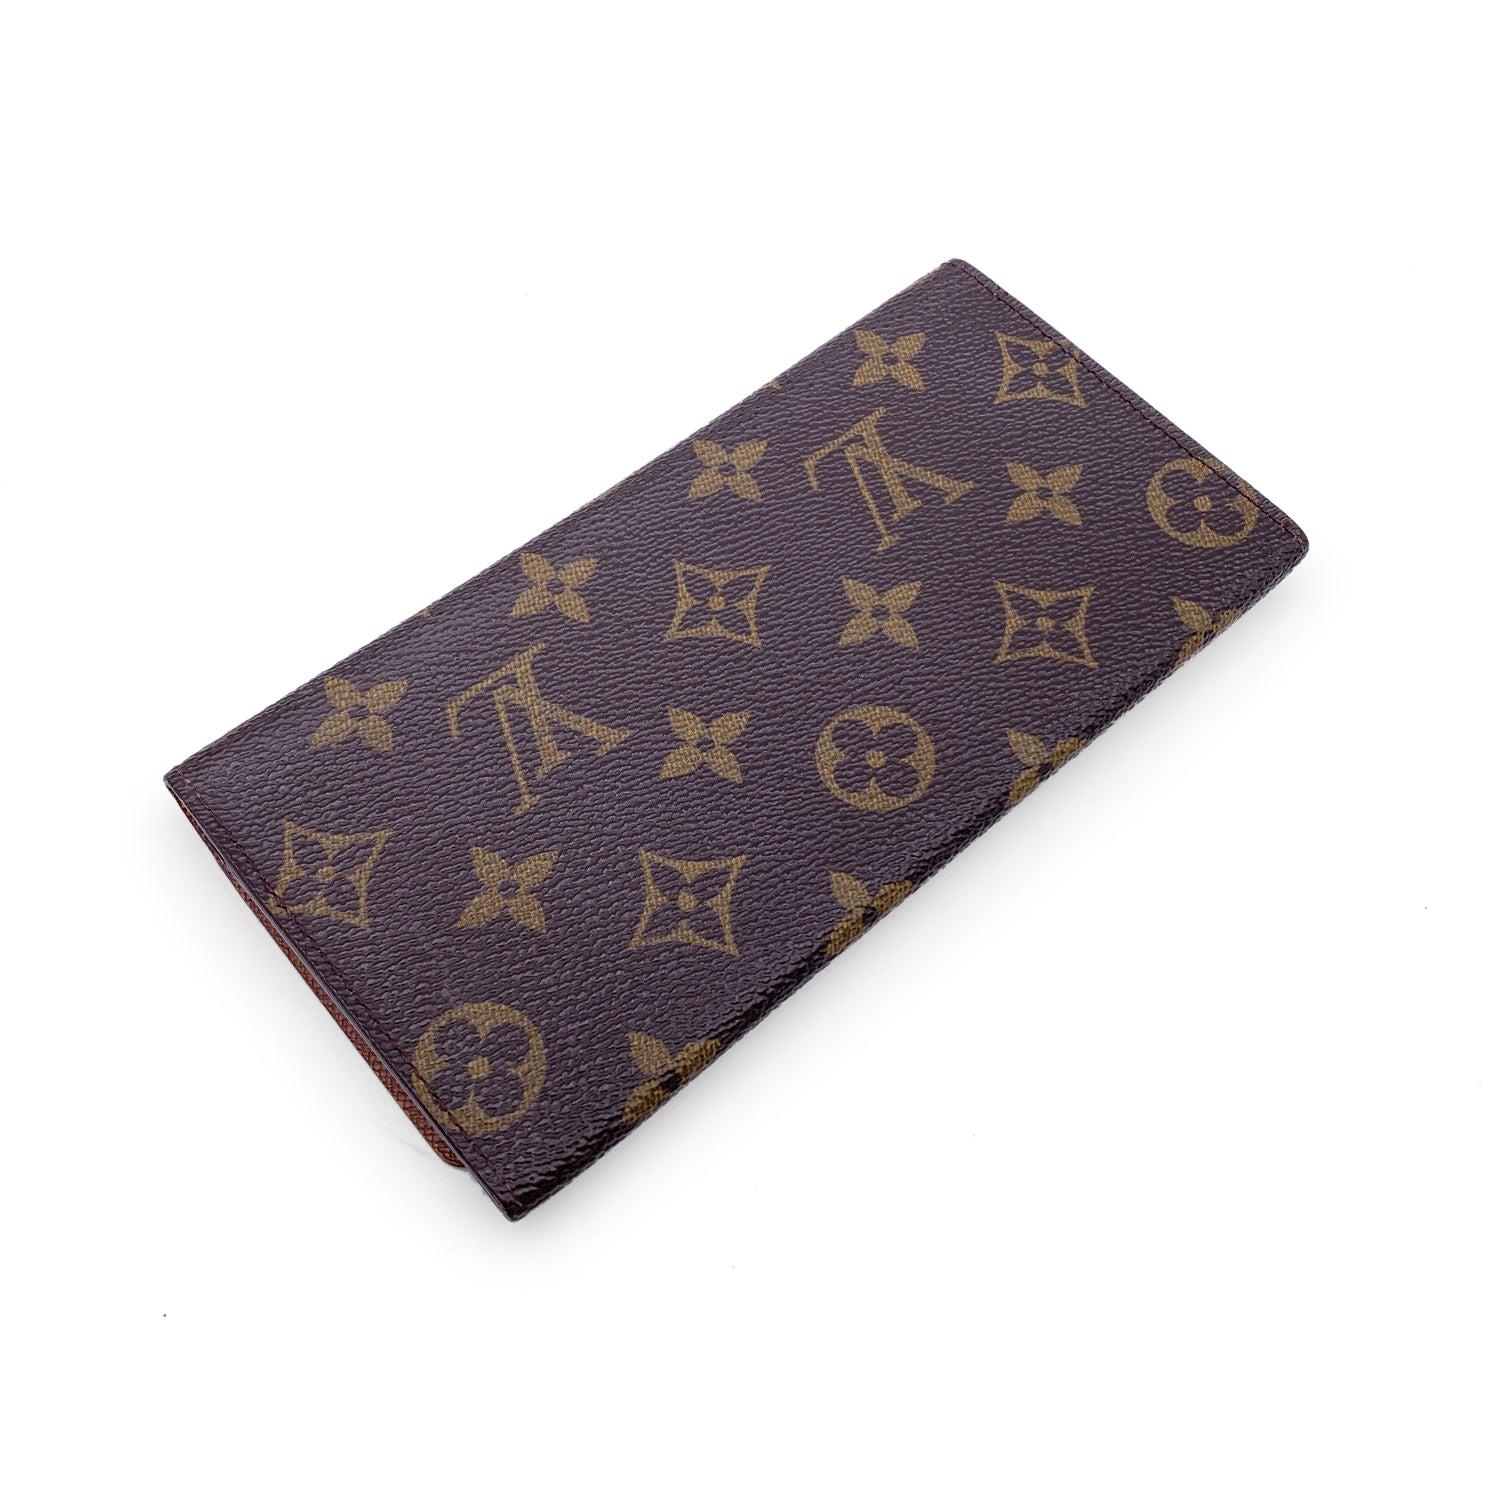 Vintage Louis Vuitton brown monogram canvas Porte Yen 3 Long Bill Wallet. Flap closure. Leather lining. 1 main compartments inside with 3 small open slots. 1 open pocket under the flap. 'LOUIS VUITTON Paris - made in Spain' embossed inside.